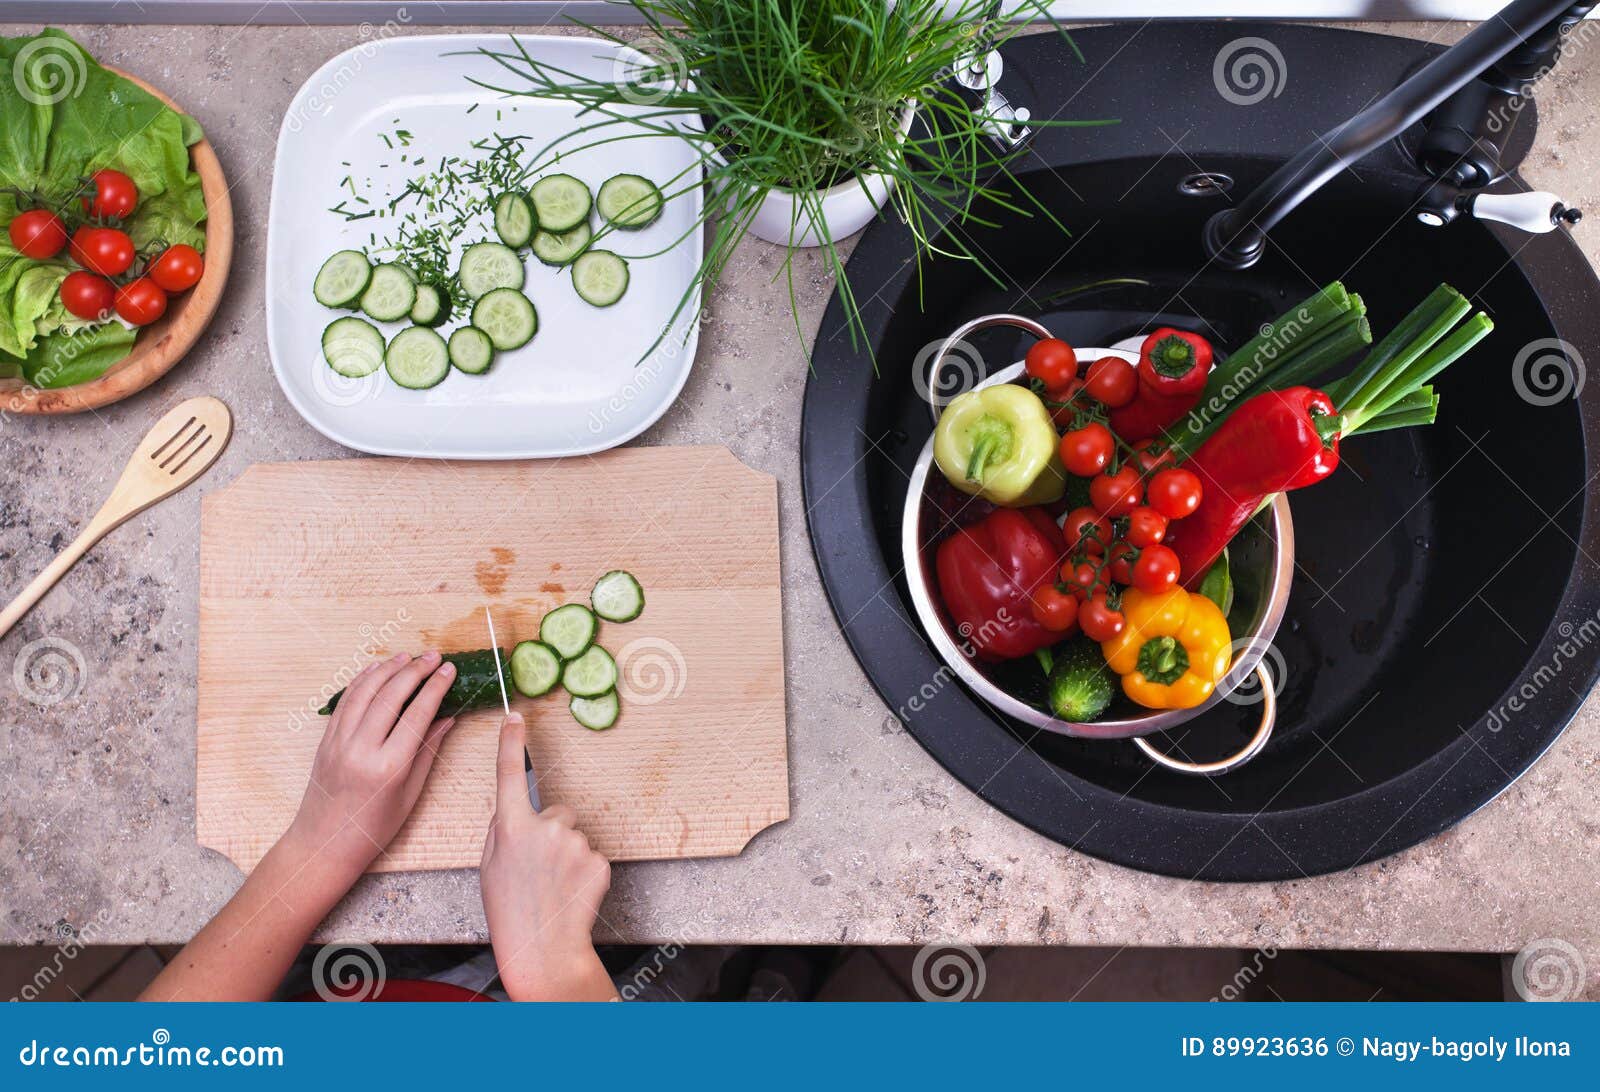 Child Hands Chopping Vegetables On Cutting Board Slicing